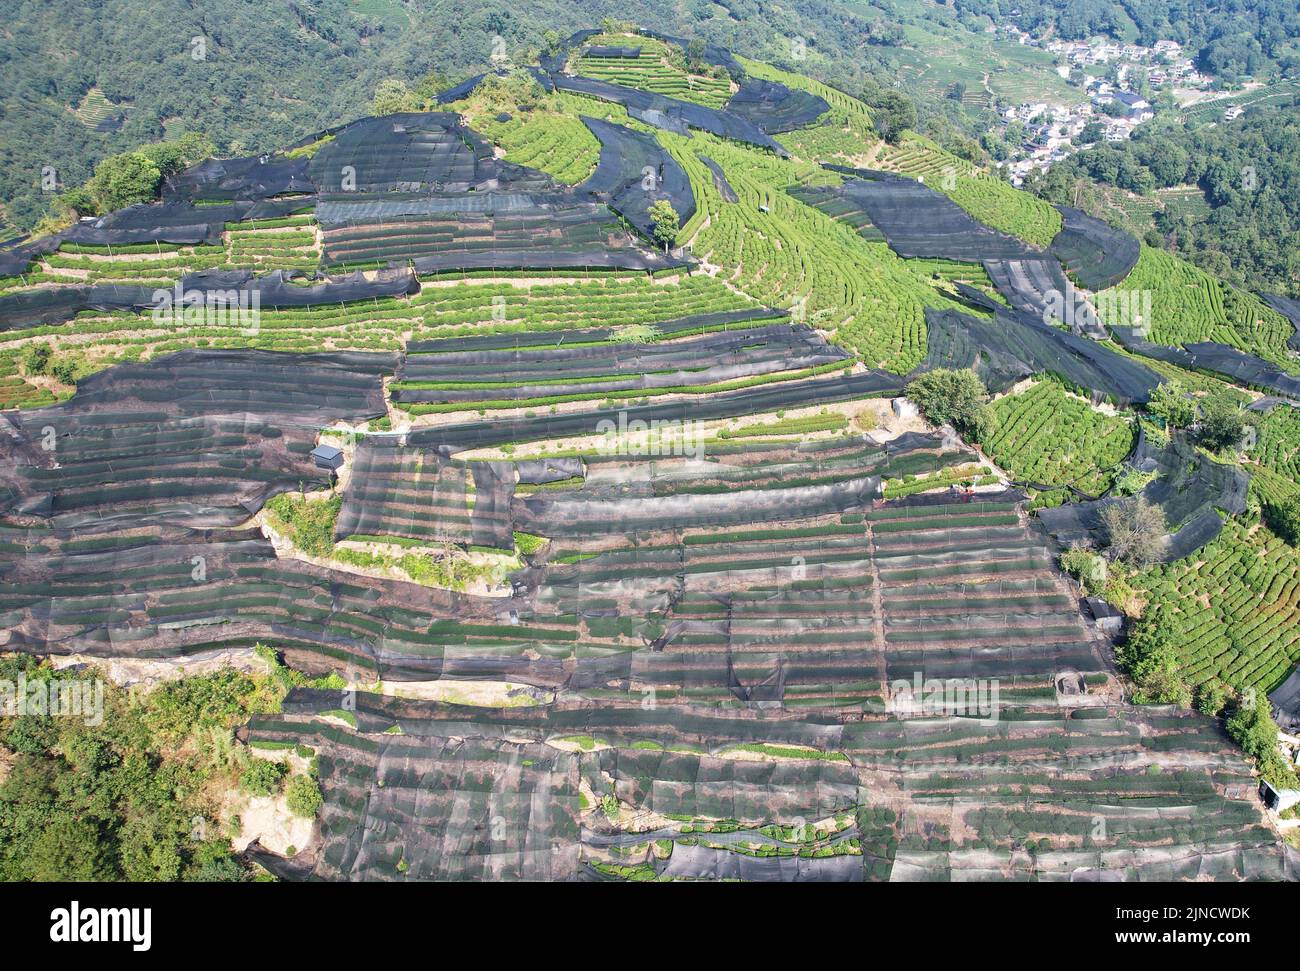 HANGZHOU, CHINA - AUGUST 11, 2022 - A large area of sun protection net covers the tea hill of Hangzhou West Lake Longjing Level 1 Protected area in Ha Stock Photo